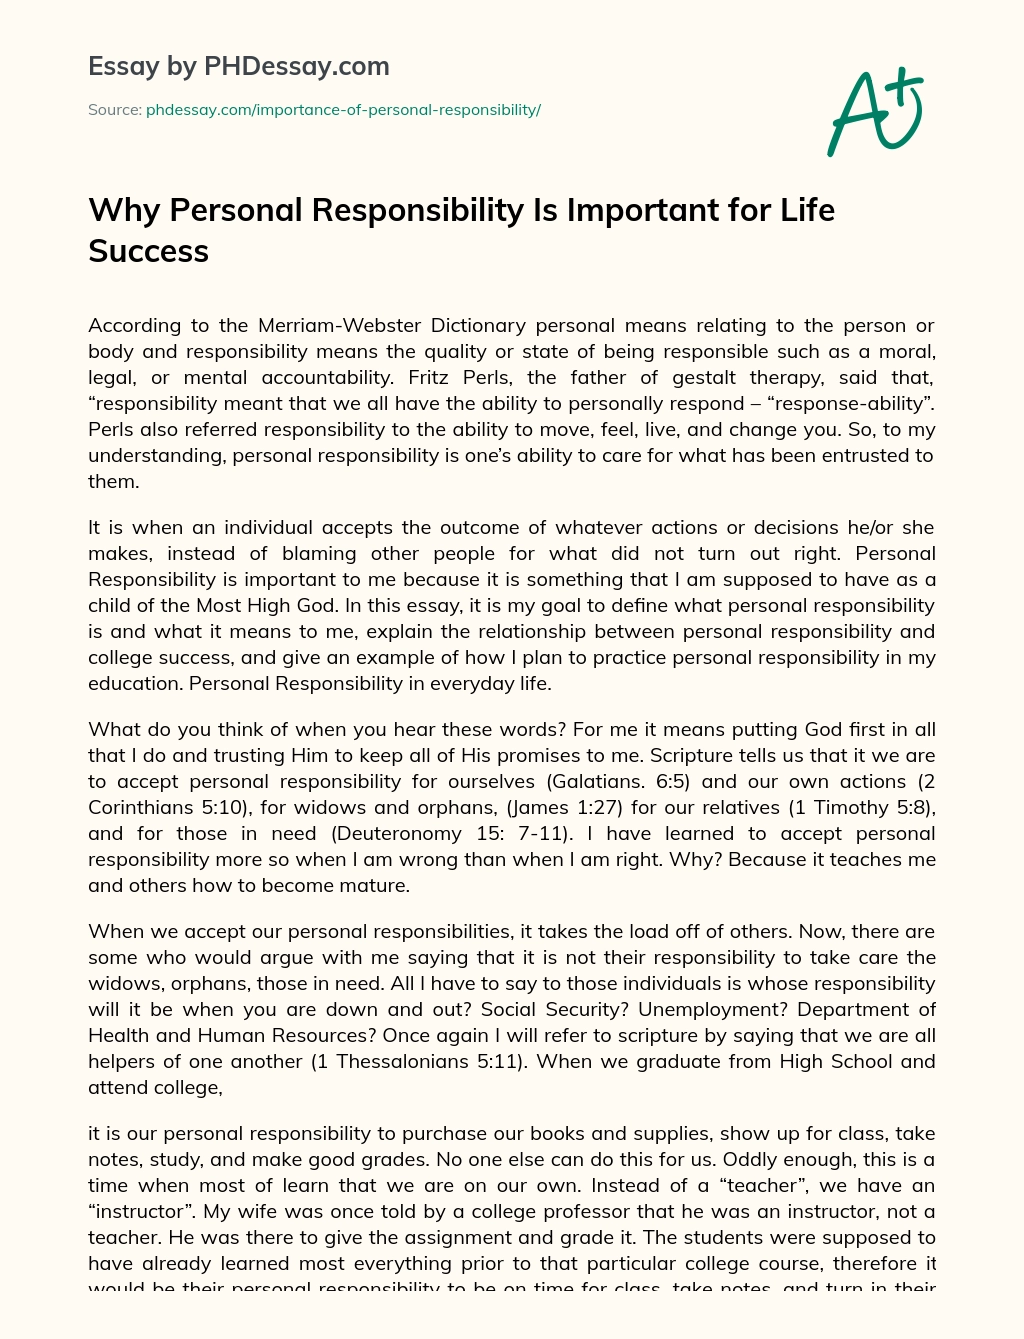 Why Personal Responsibility Is Important for Life Success essay